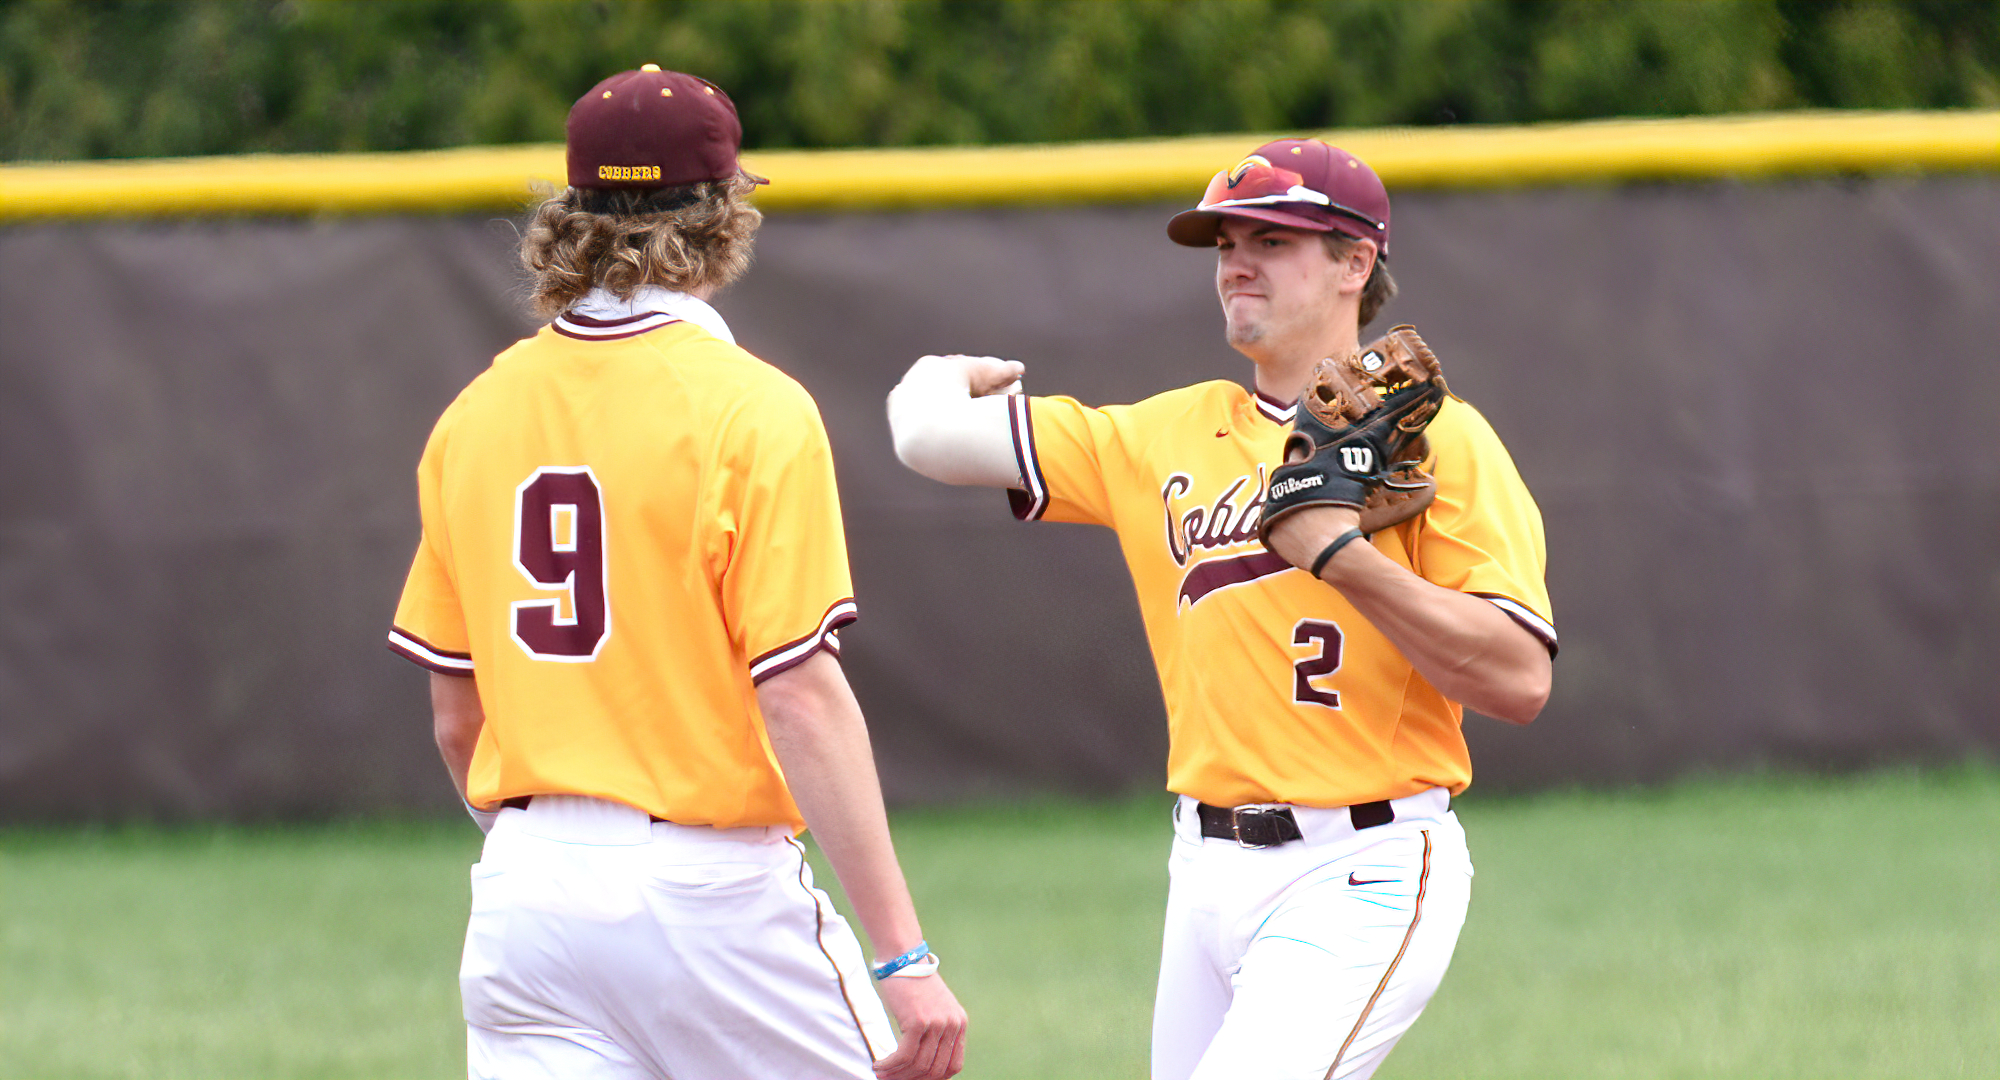 Matt Gruber (#2) and Thomas Horan (#9) both had a game-high three hits in the Cobbers' season opener against St. Mary's in Florida.